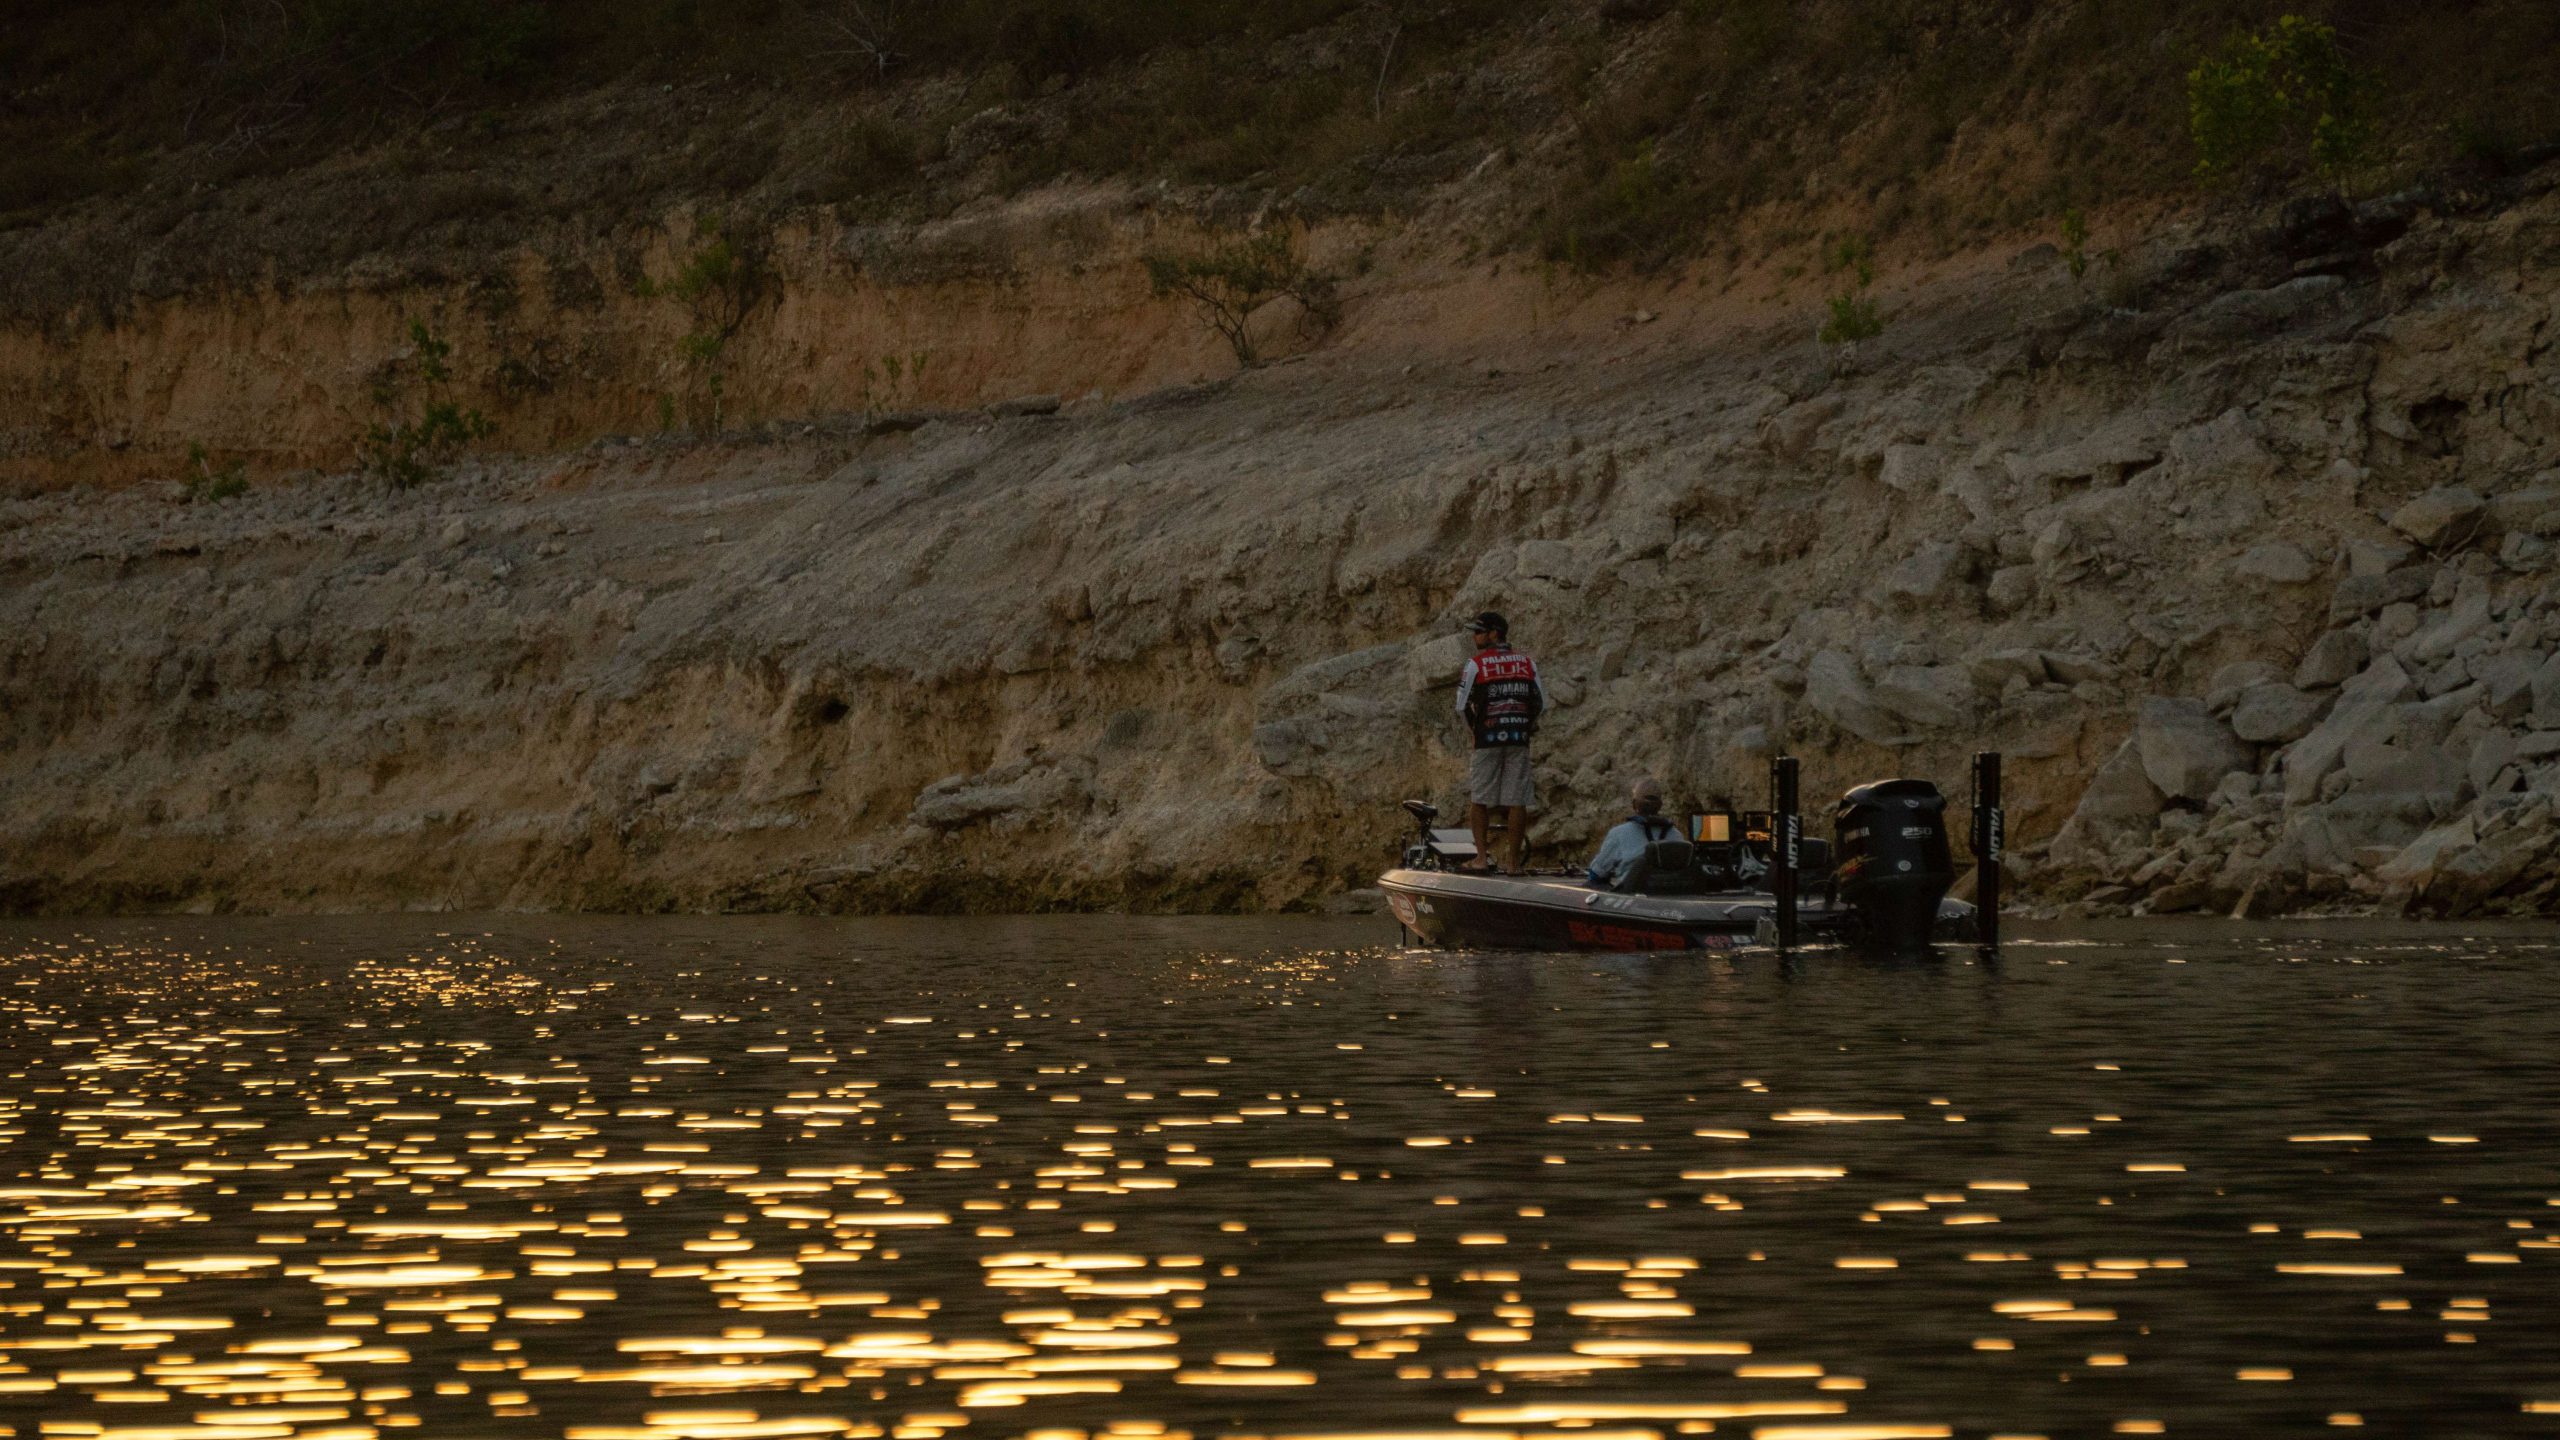 See pictures from Brandon Palaniuk's Day 1 on Lake Travis.